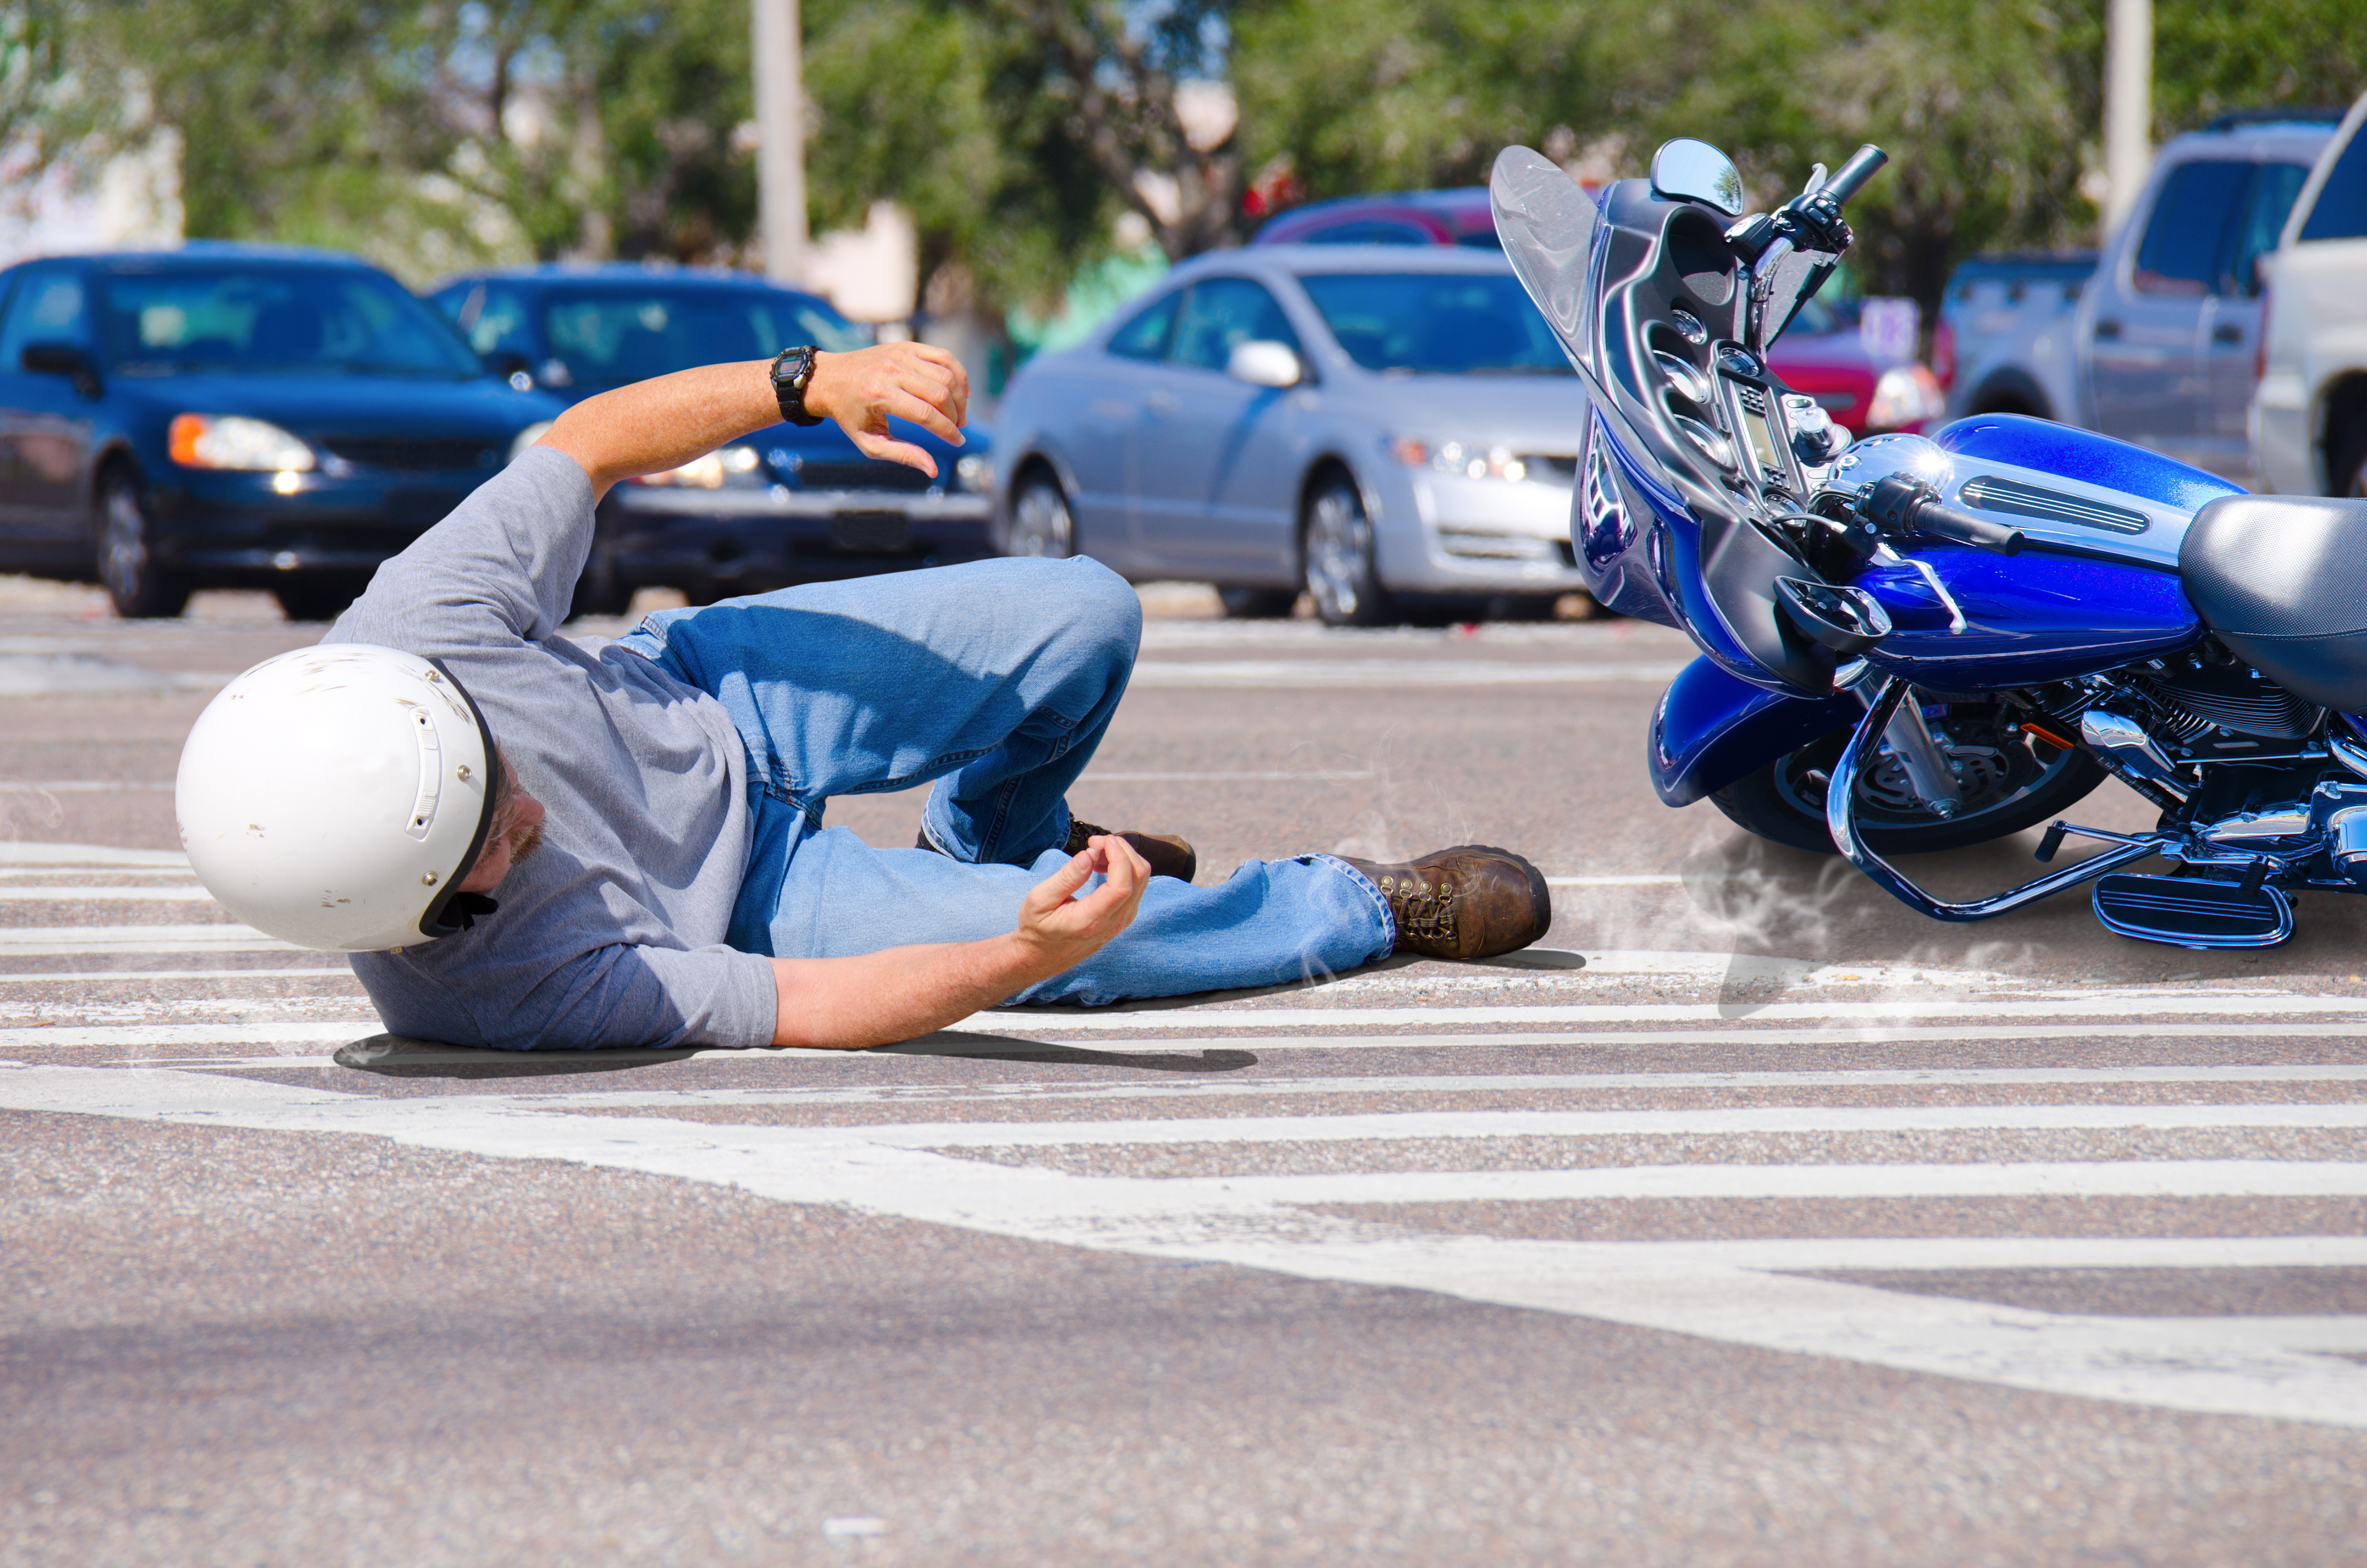 Motorcycle Accident Lawyer Help